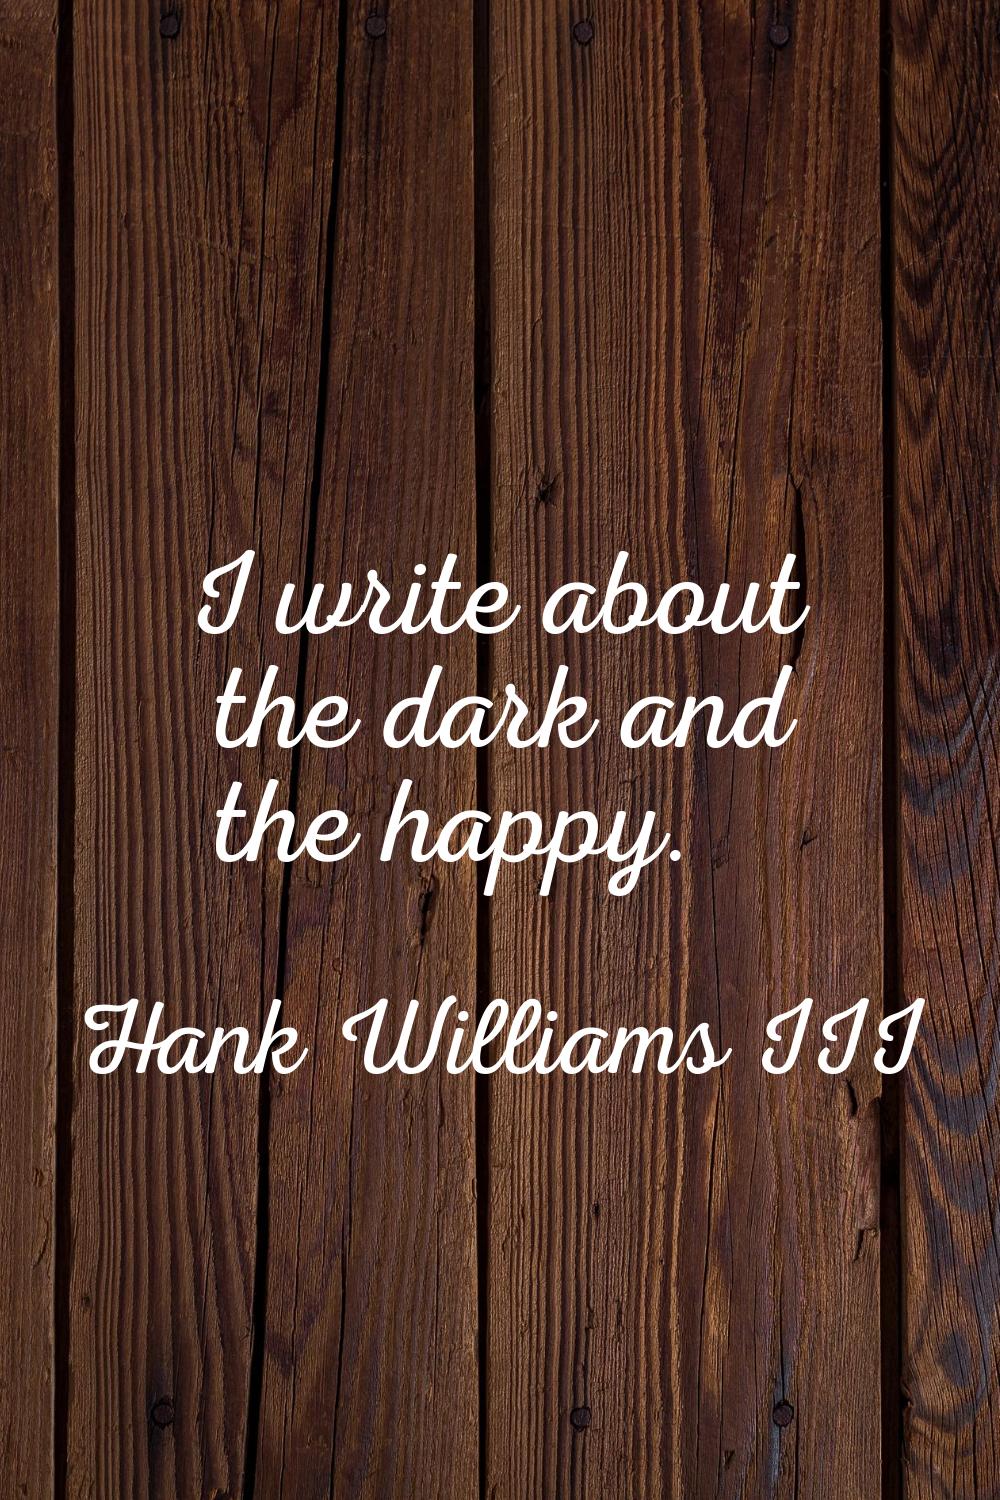 I write about the dark and the happy.